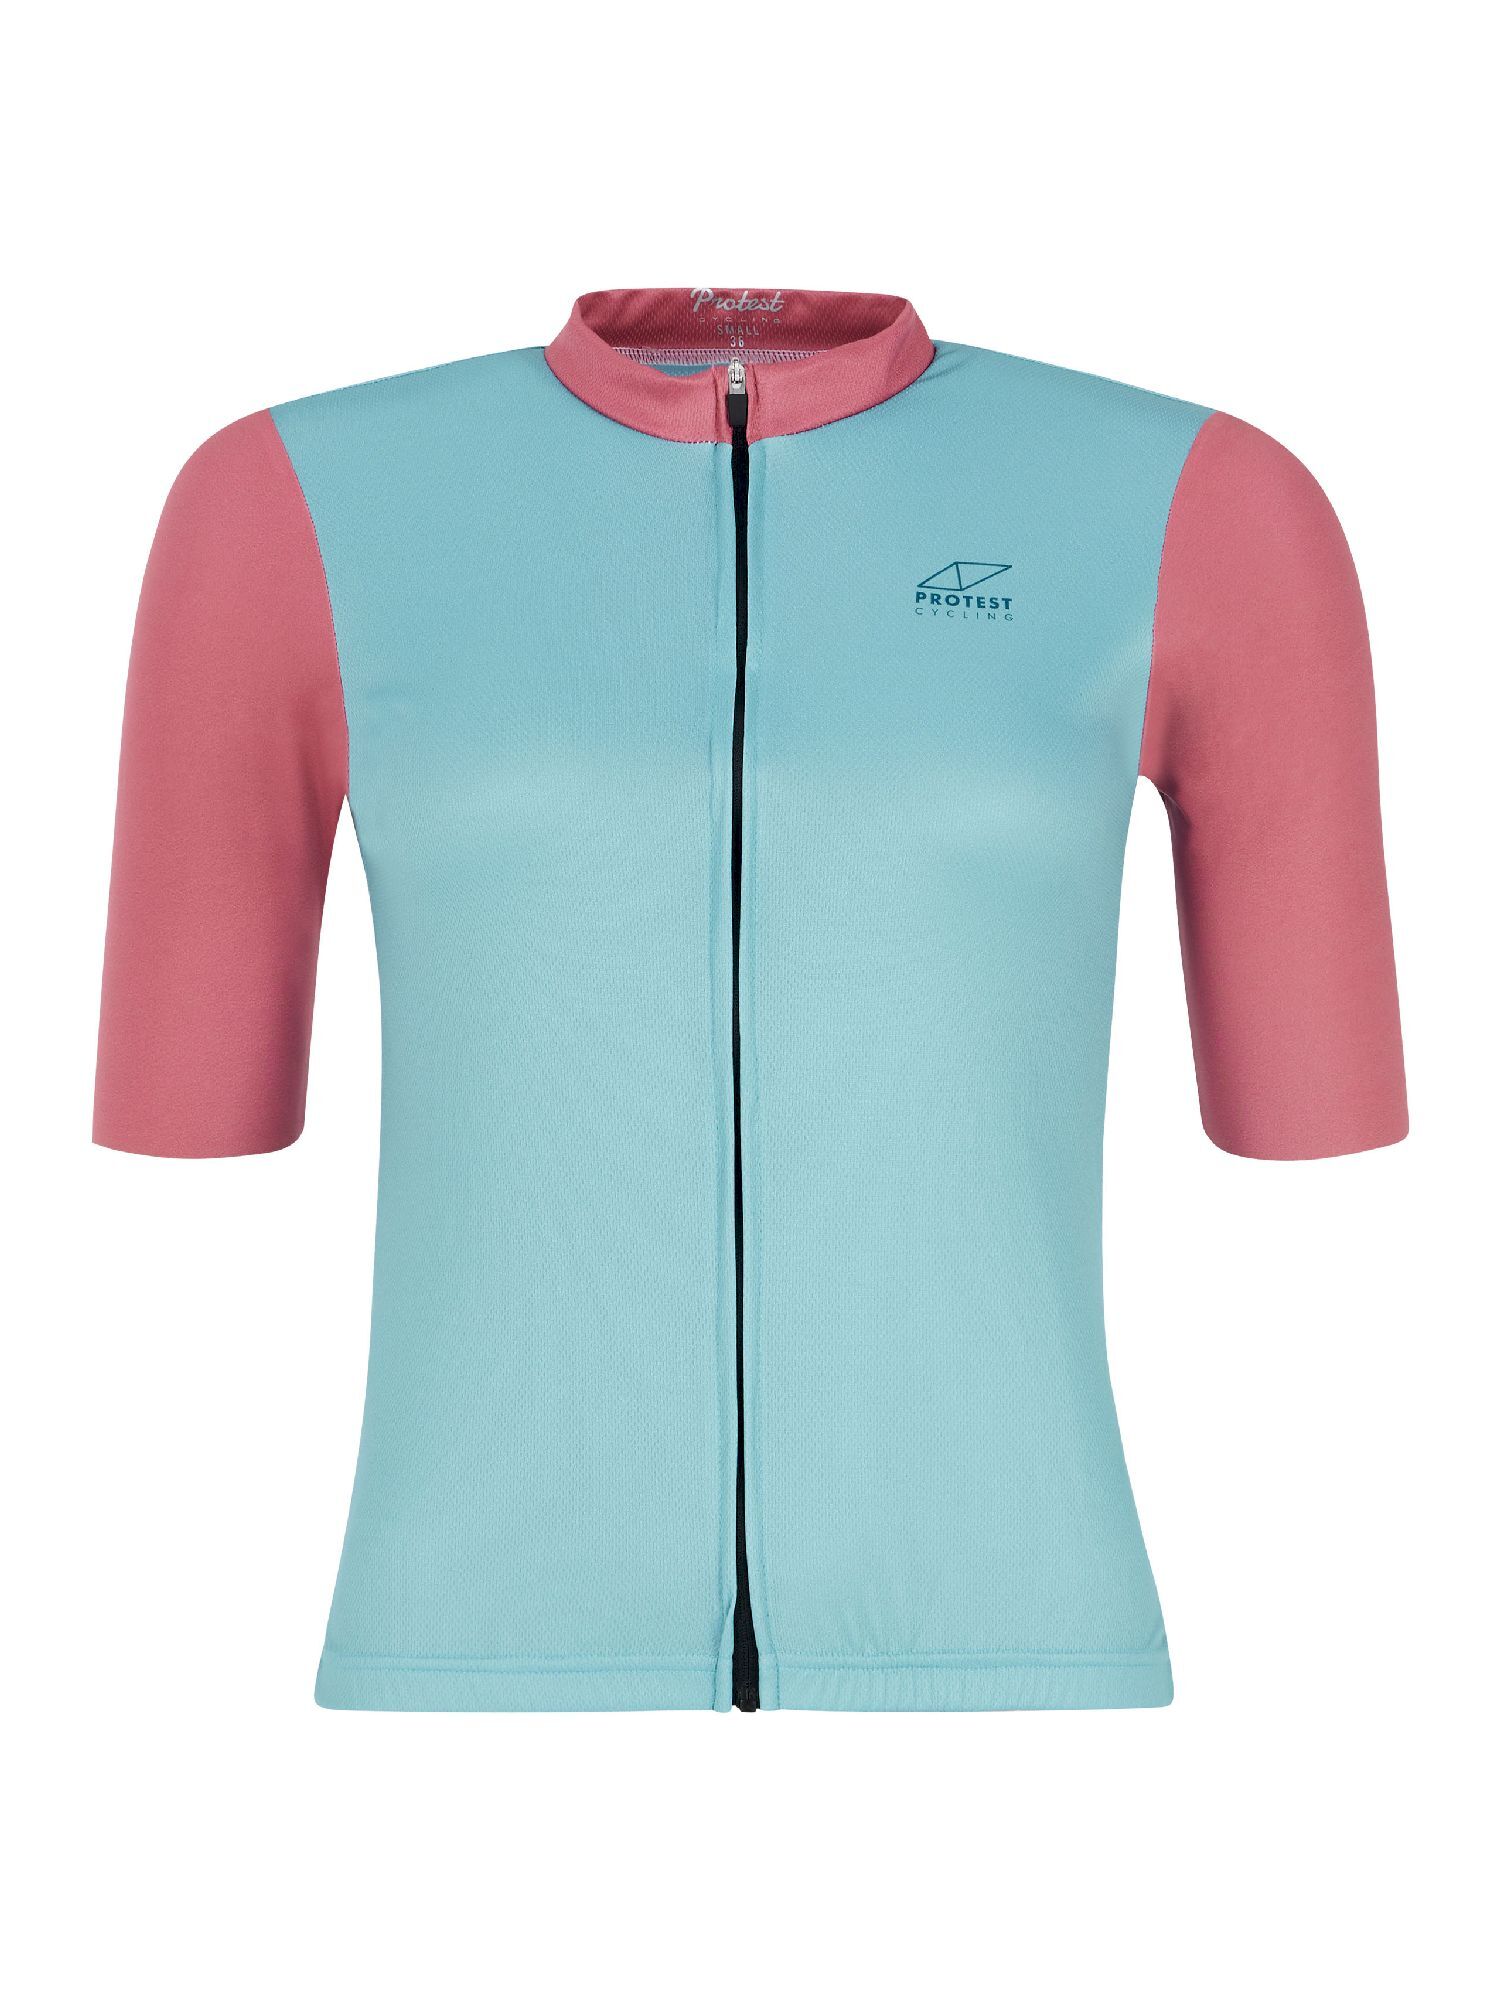 Protest Prtadieu - Cycling jersey - Women's | Hardloop